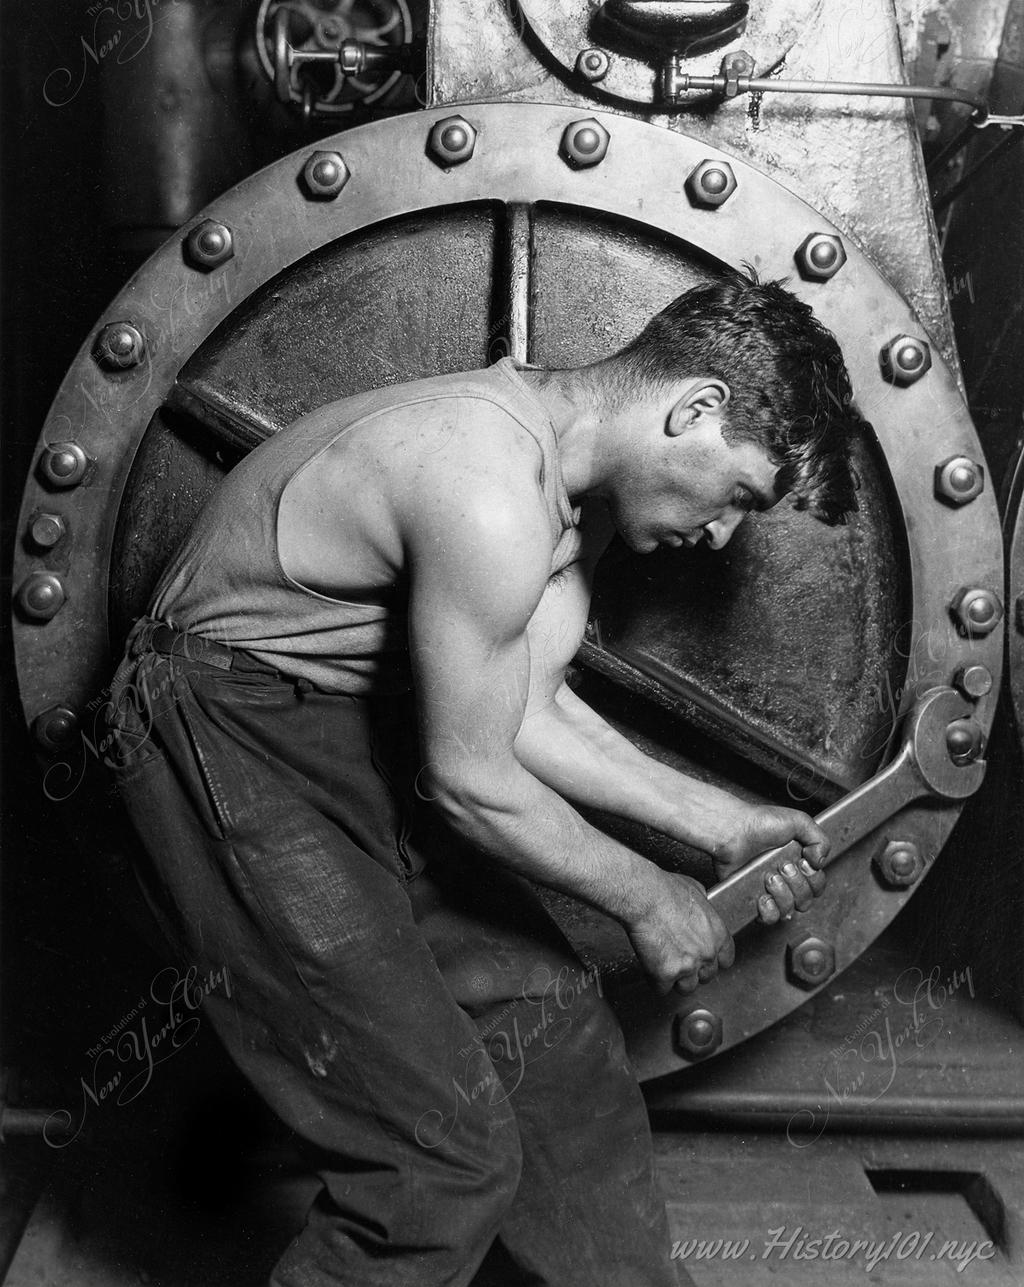 Photograph of a young mechanic tightening the bolts of a steam pump with a wrench.